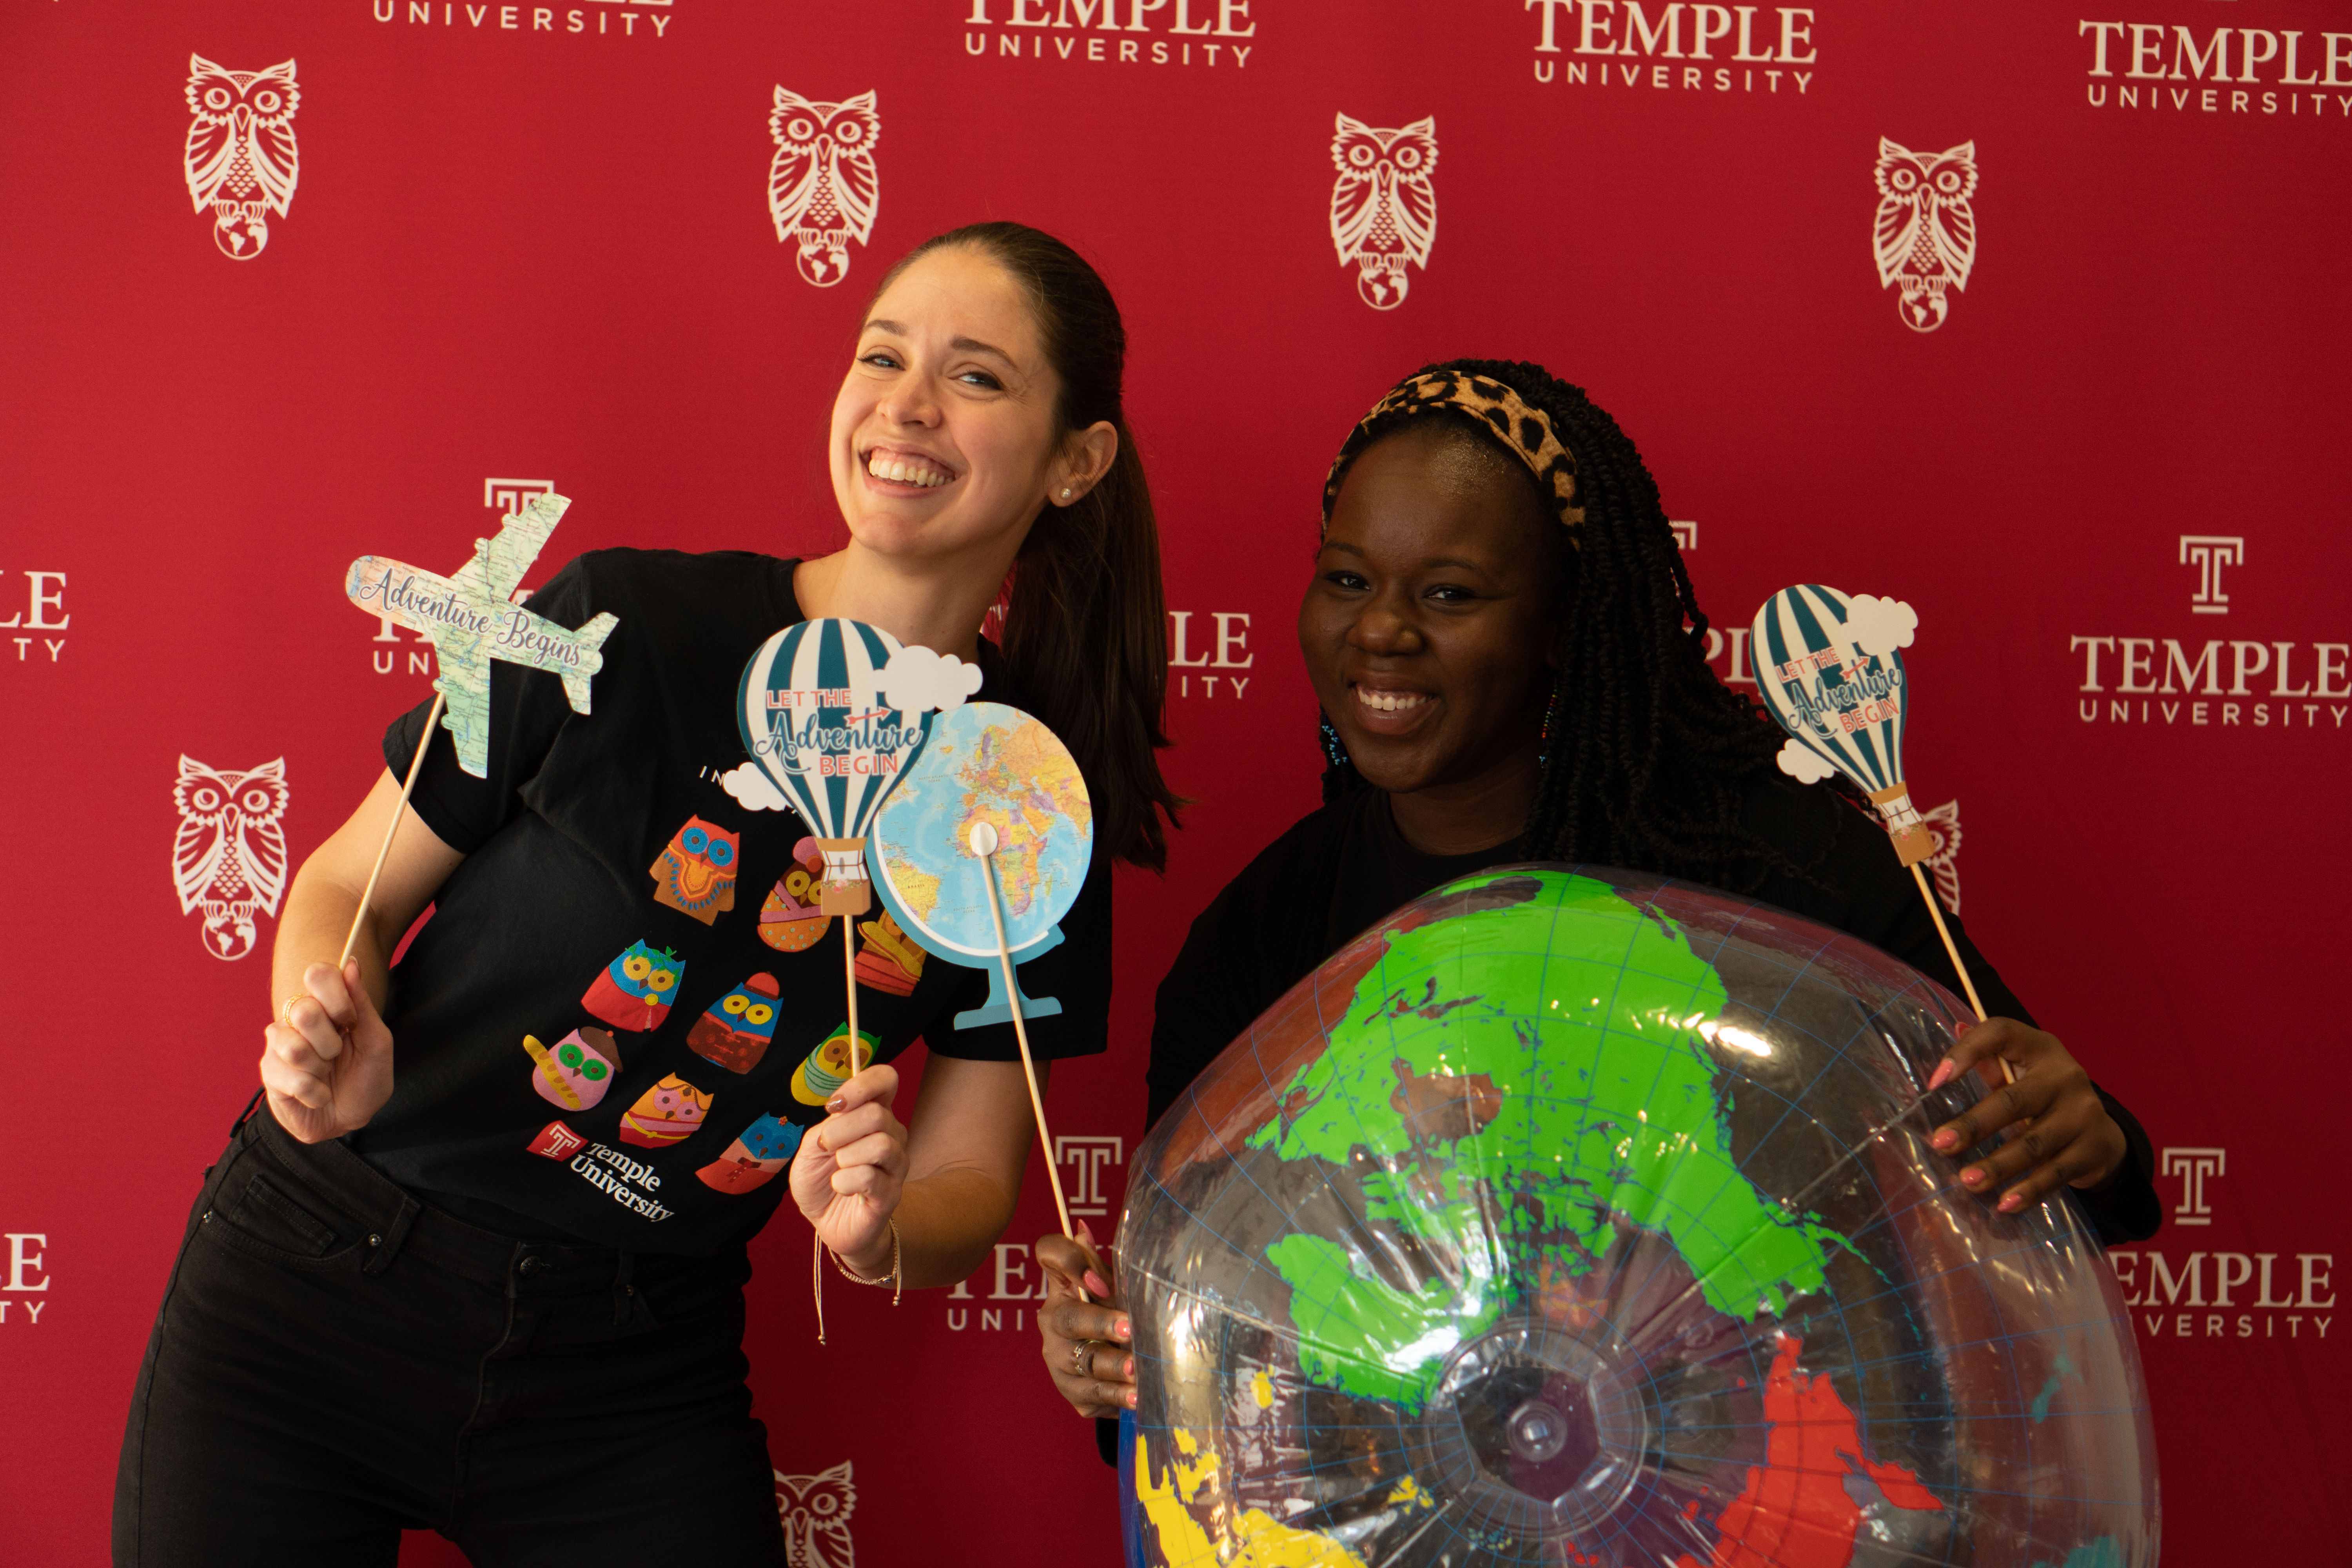 Two student workers holding an inflatable transparent globe ball and smiling into the camera, waving props.